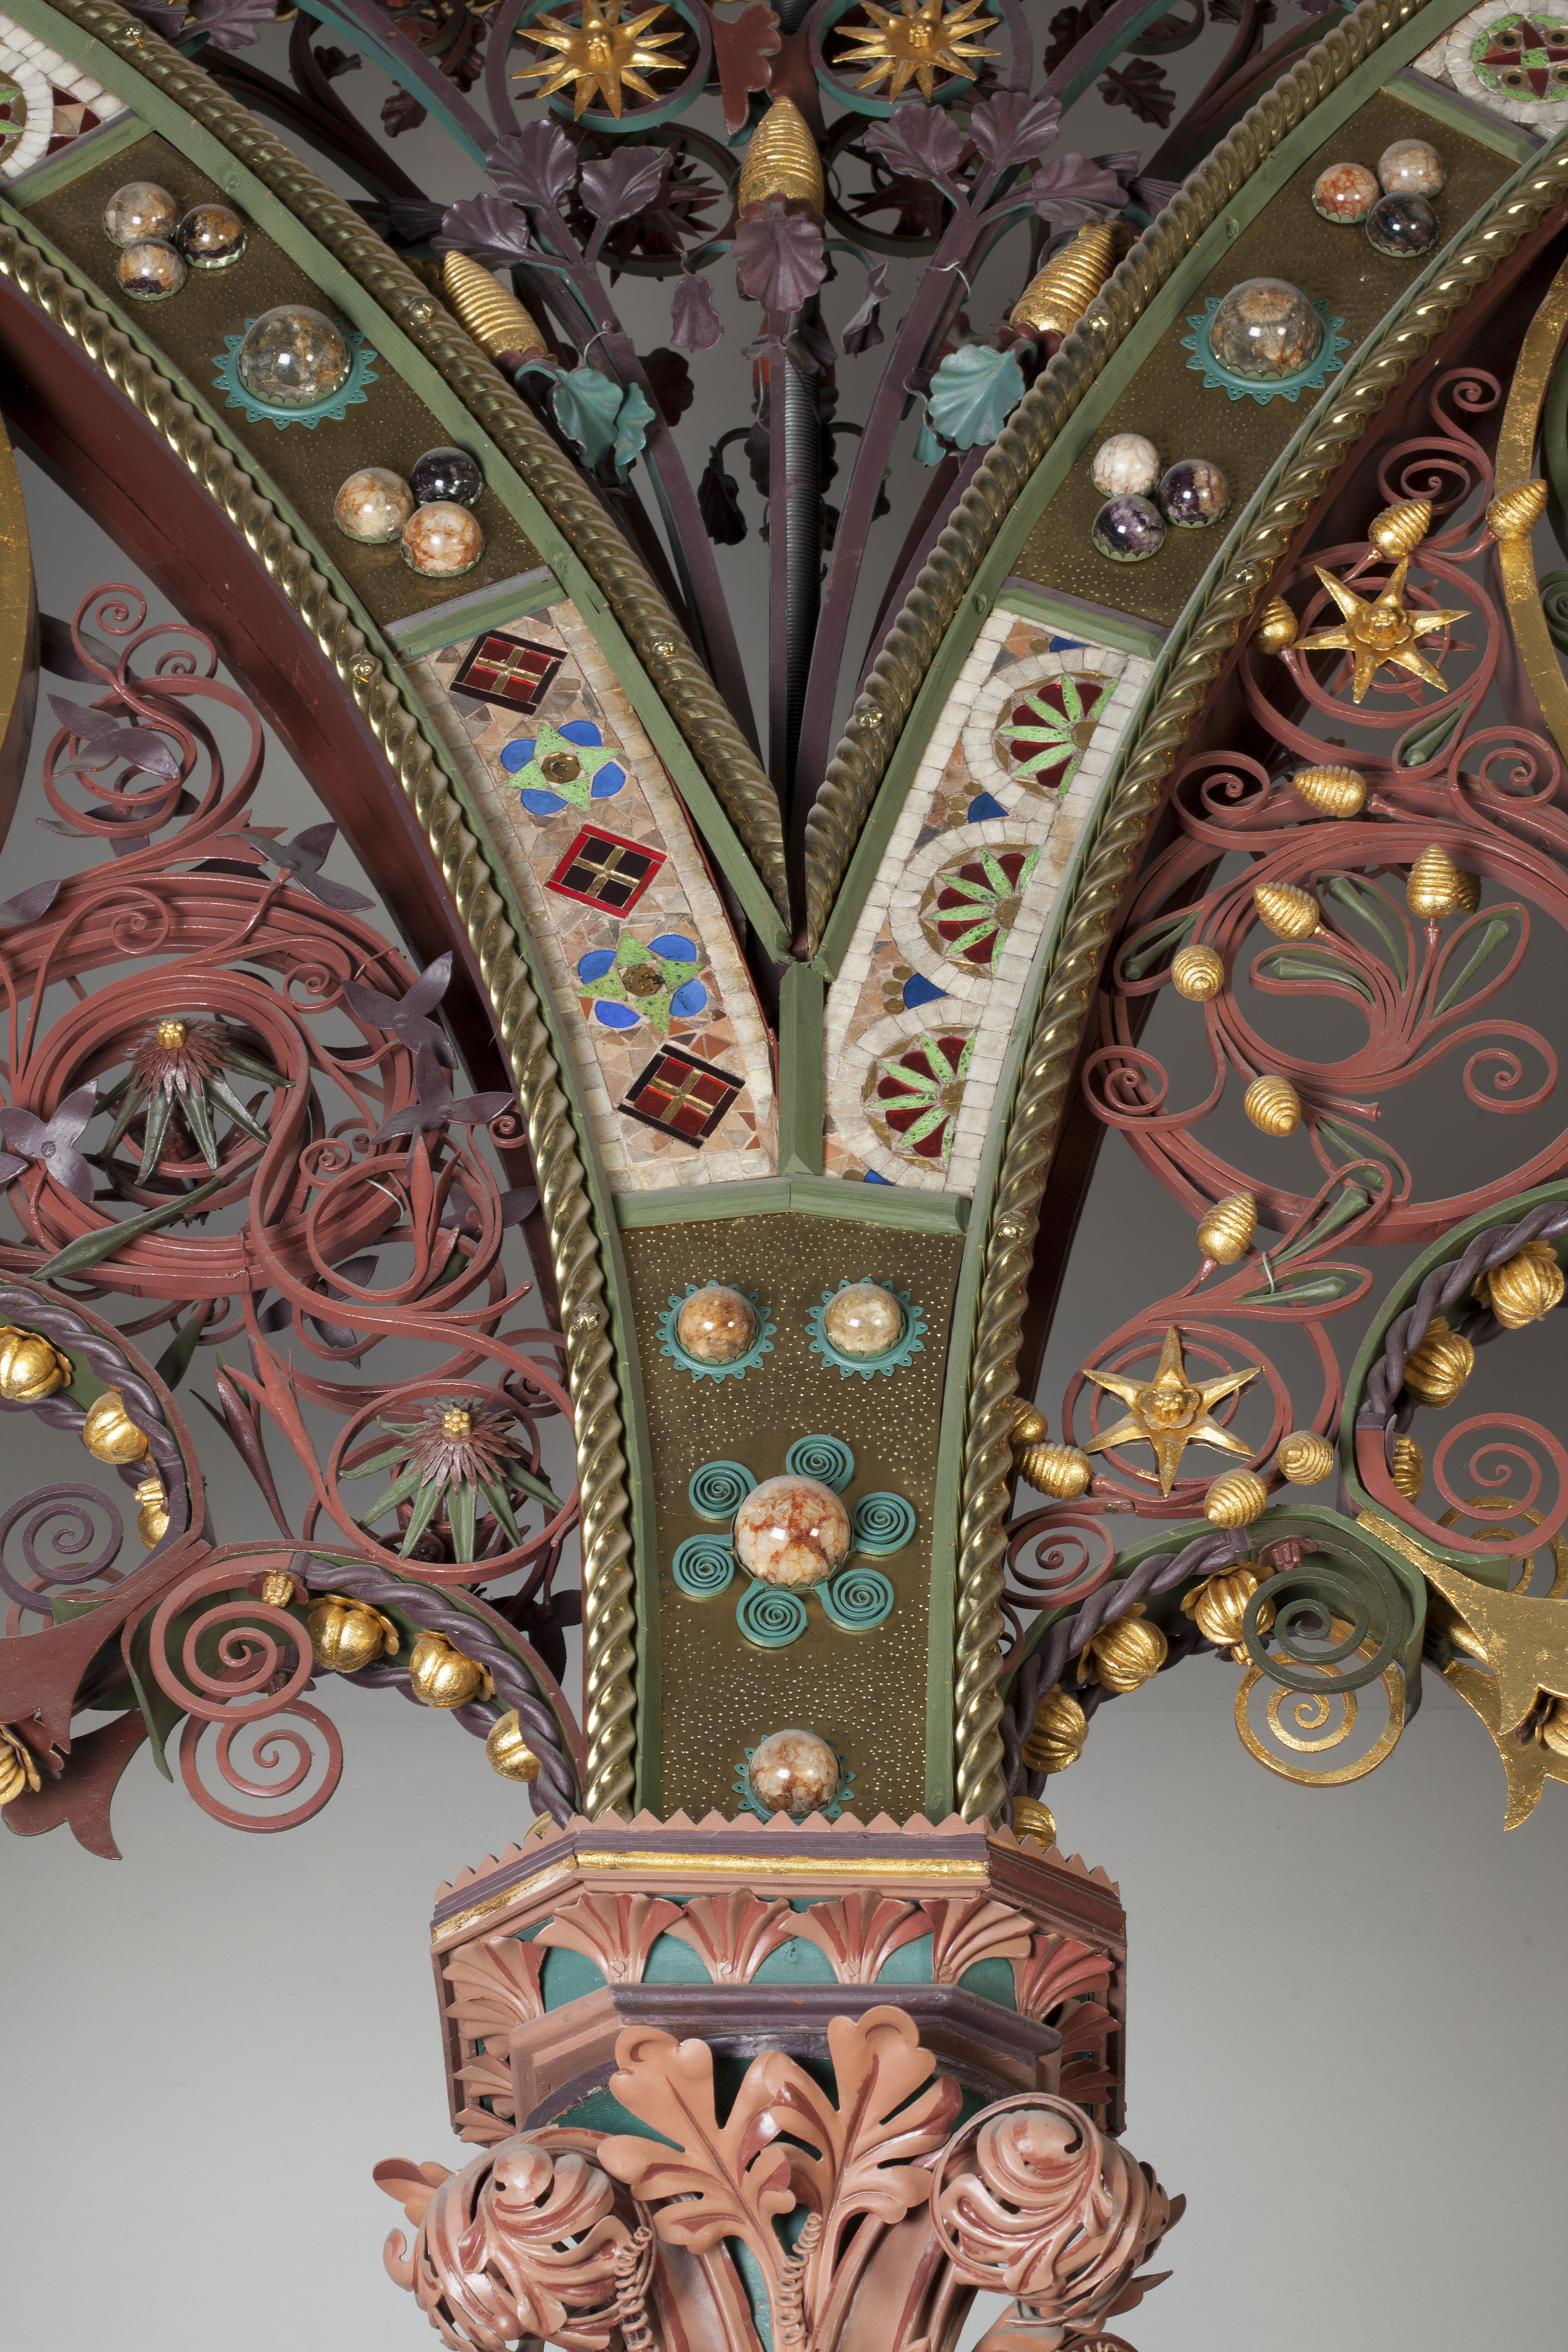 1862, painted wrought and cast iron, brass, copper, timber, mosaics and hardstones. Collection of the Victoria and Albert Museum, London, Given by Herbert Art Gallery and Museum, Coventry